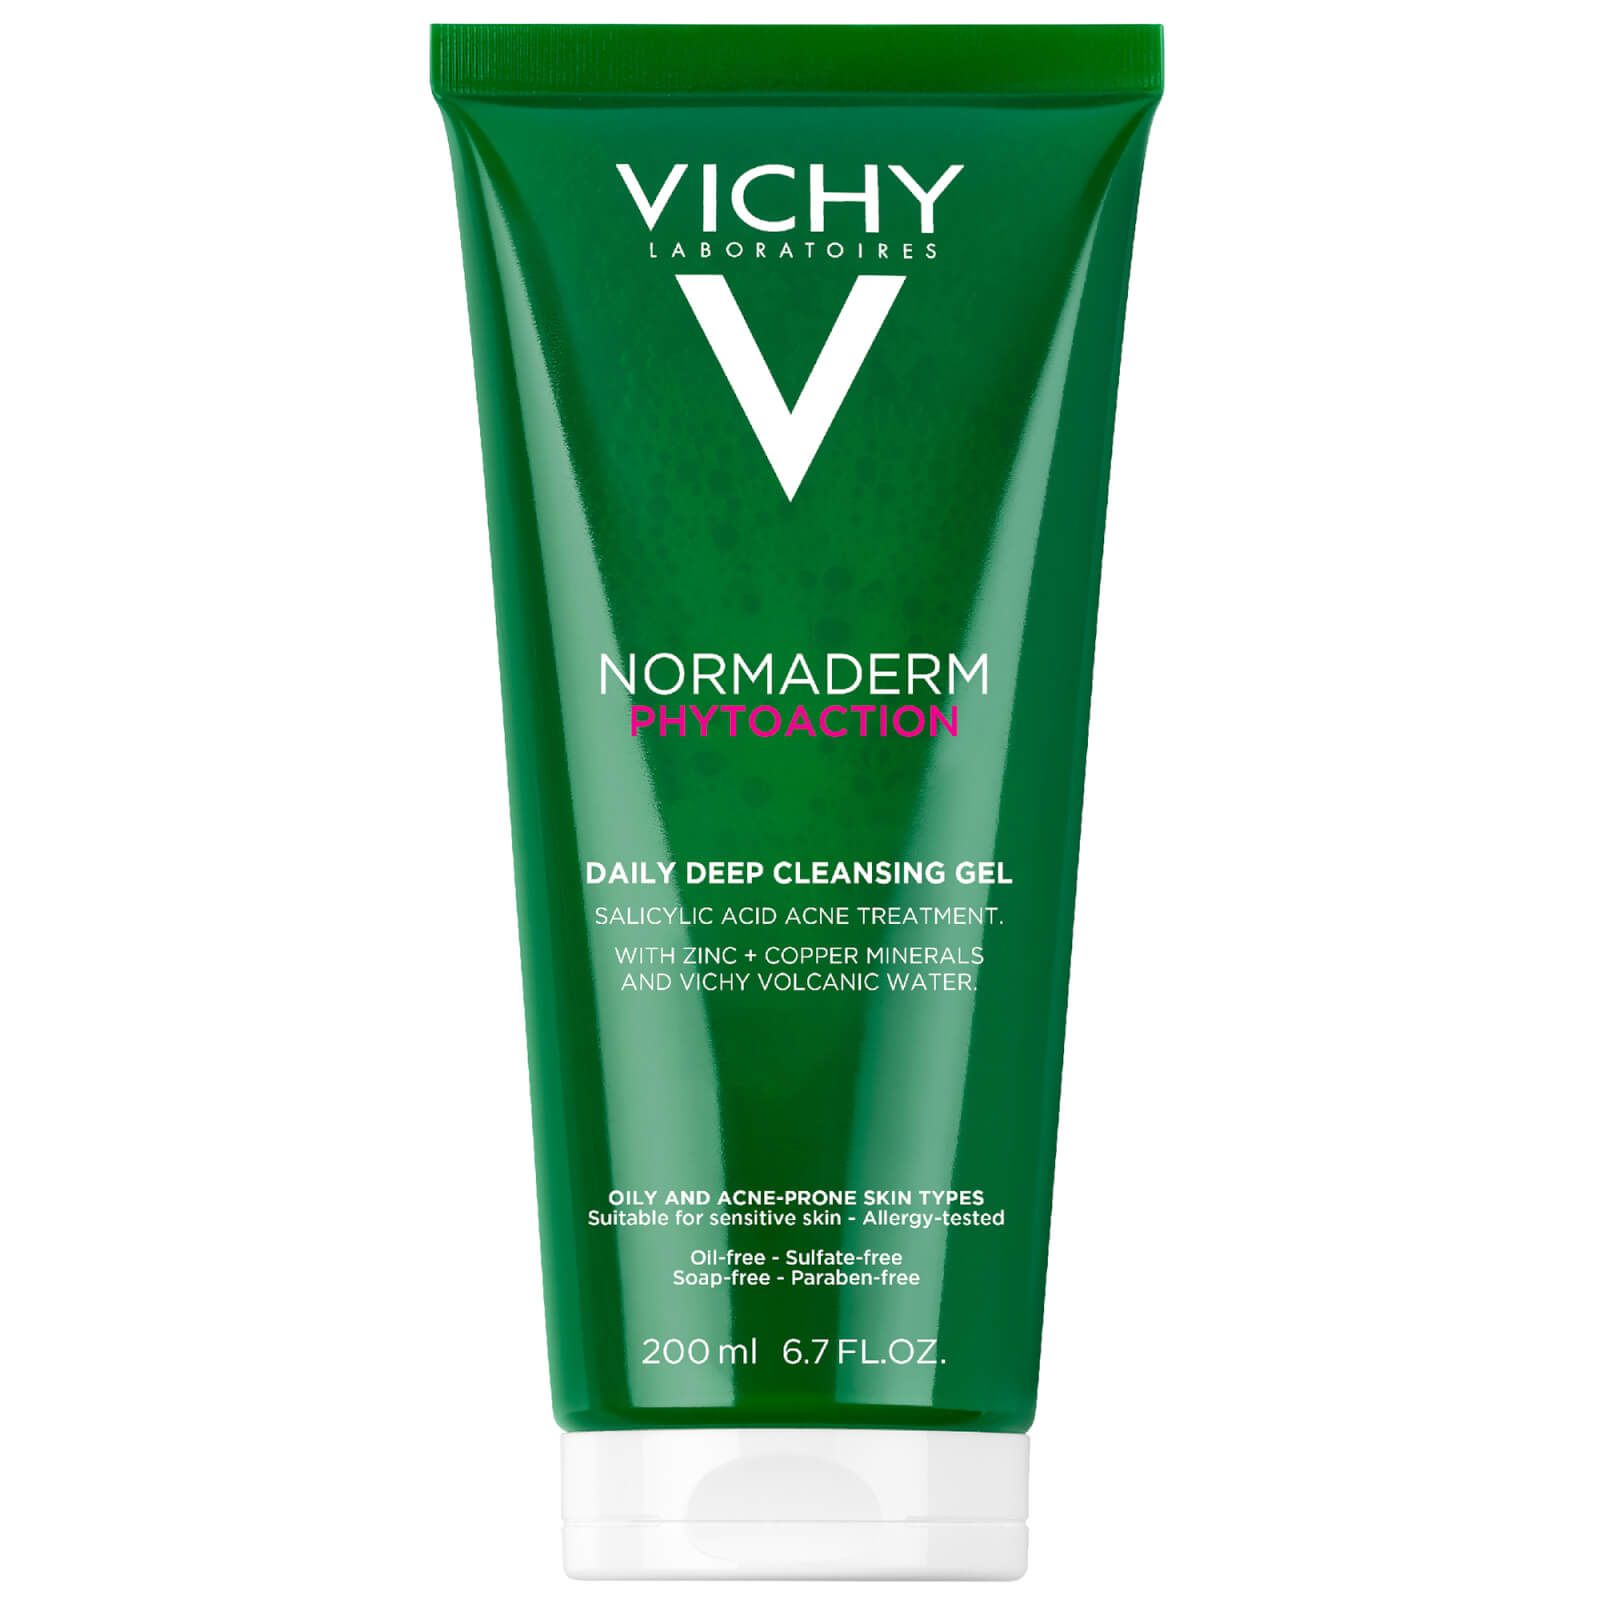 Photos - Facial / Body Cleansing Product Vichy Normaderm Deep Cleansing Purifying Gel 200ml MB158600 